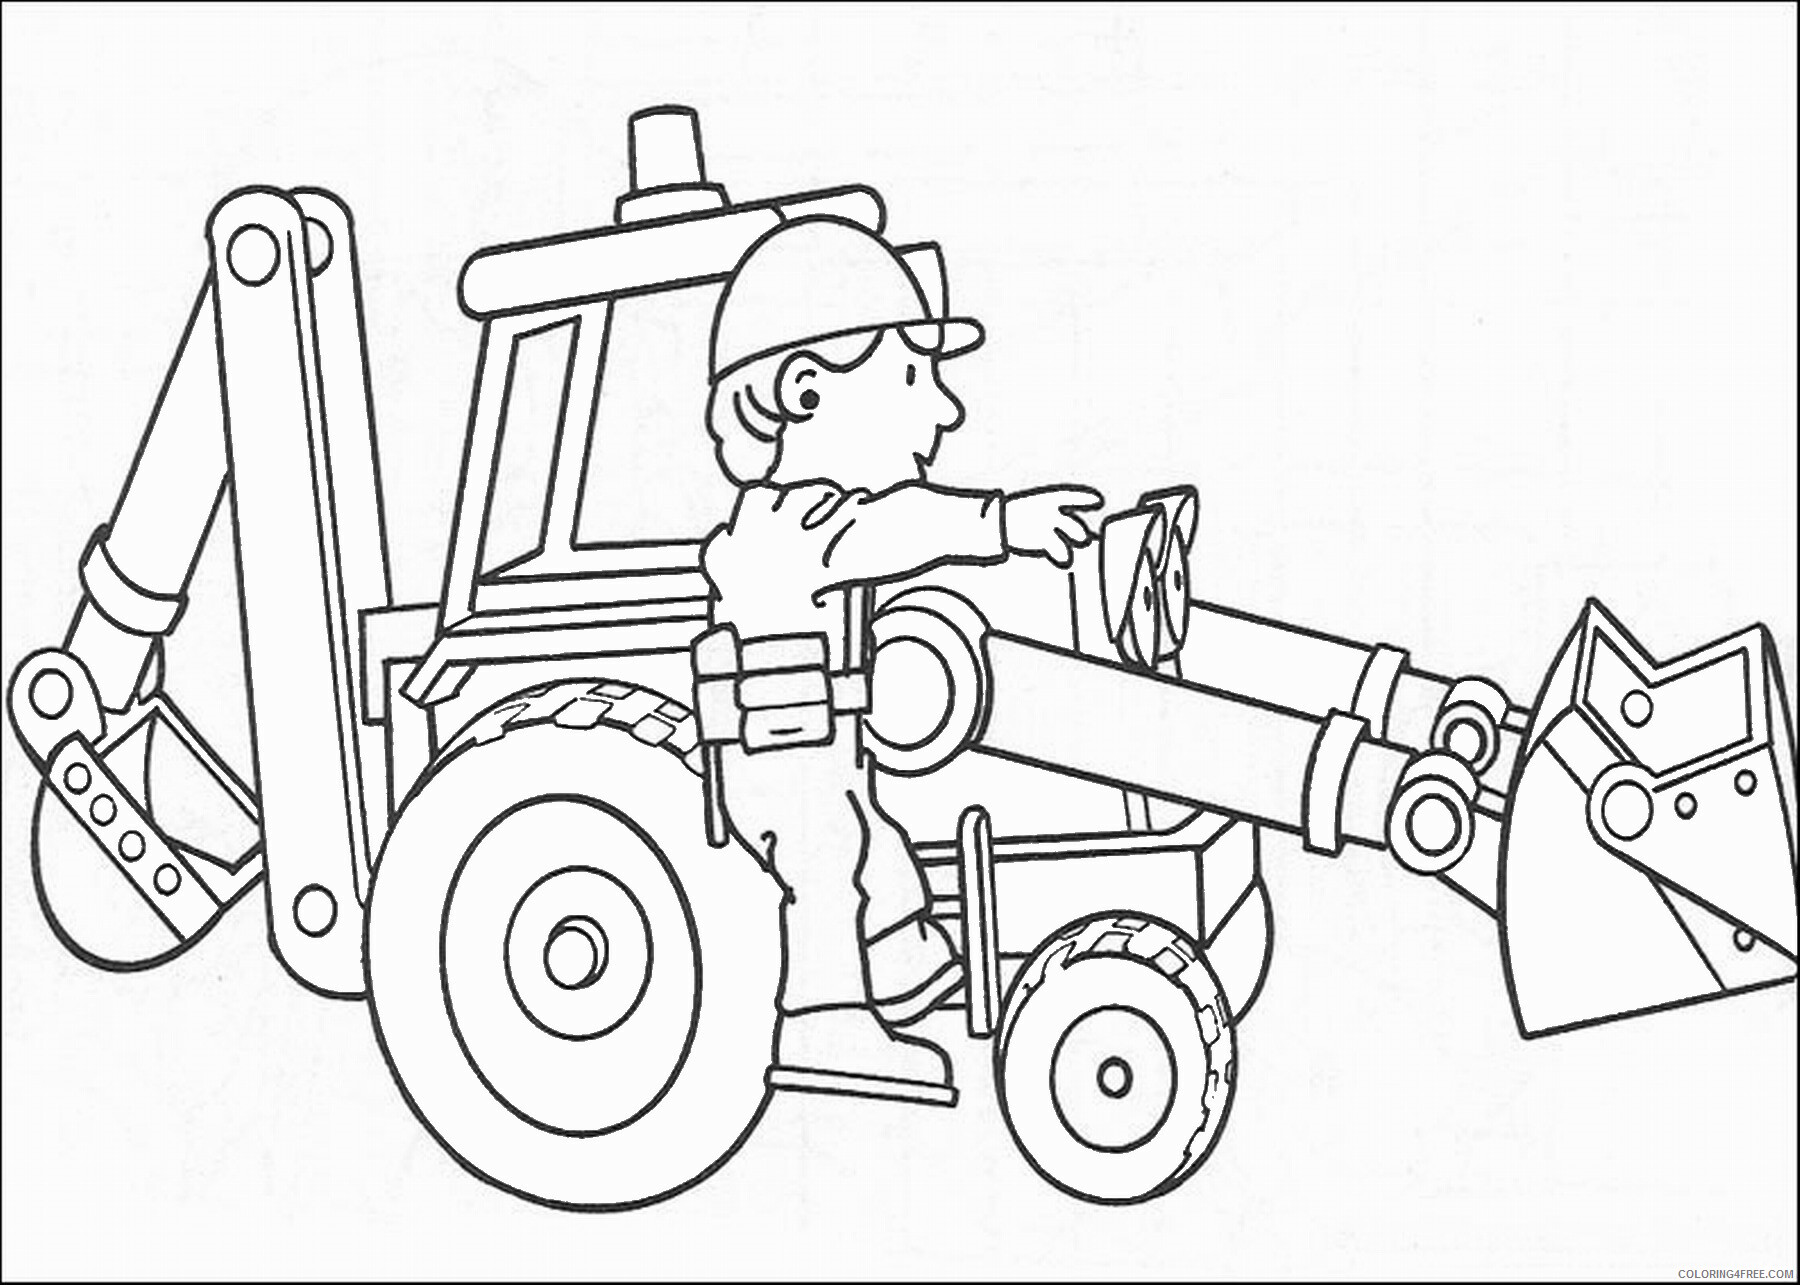 Bob the Builder Coloring Pages TV Film bob the builder_12 Printable 2020 00962 Coloring4free